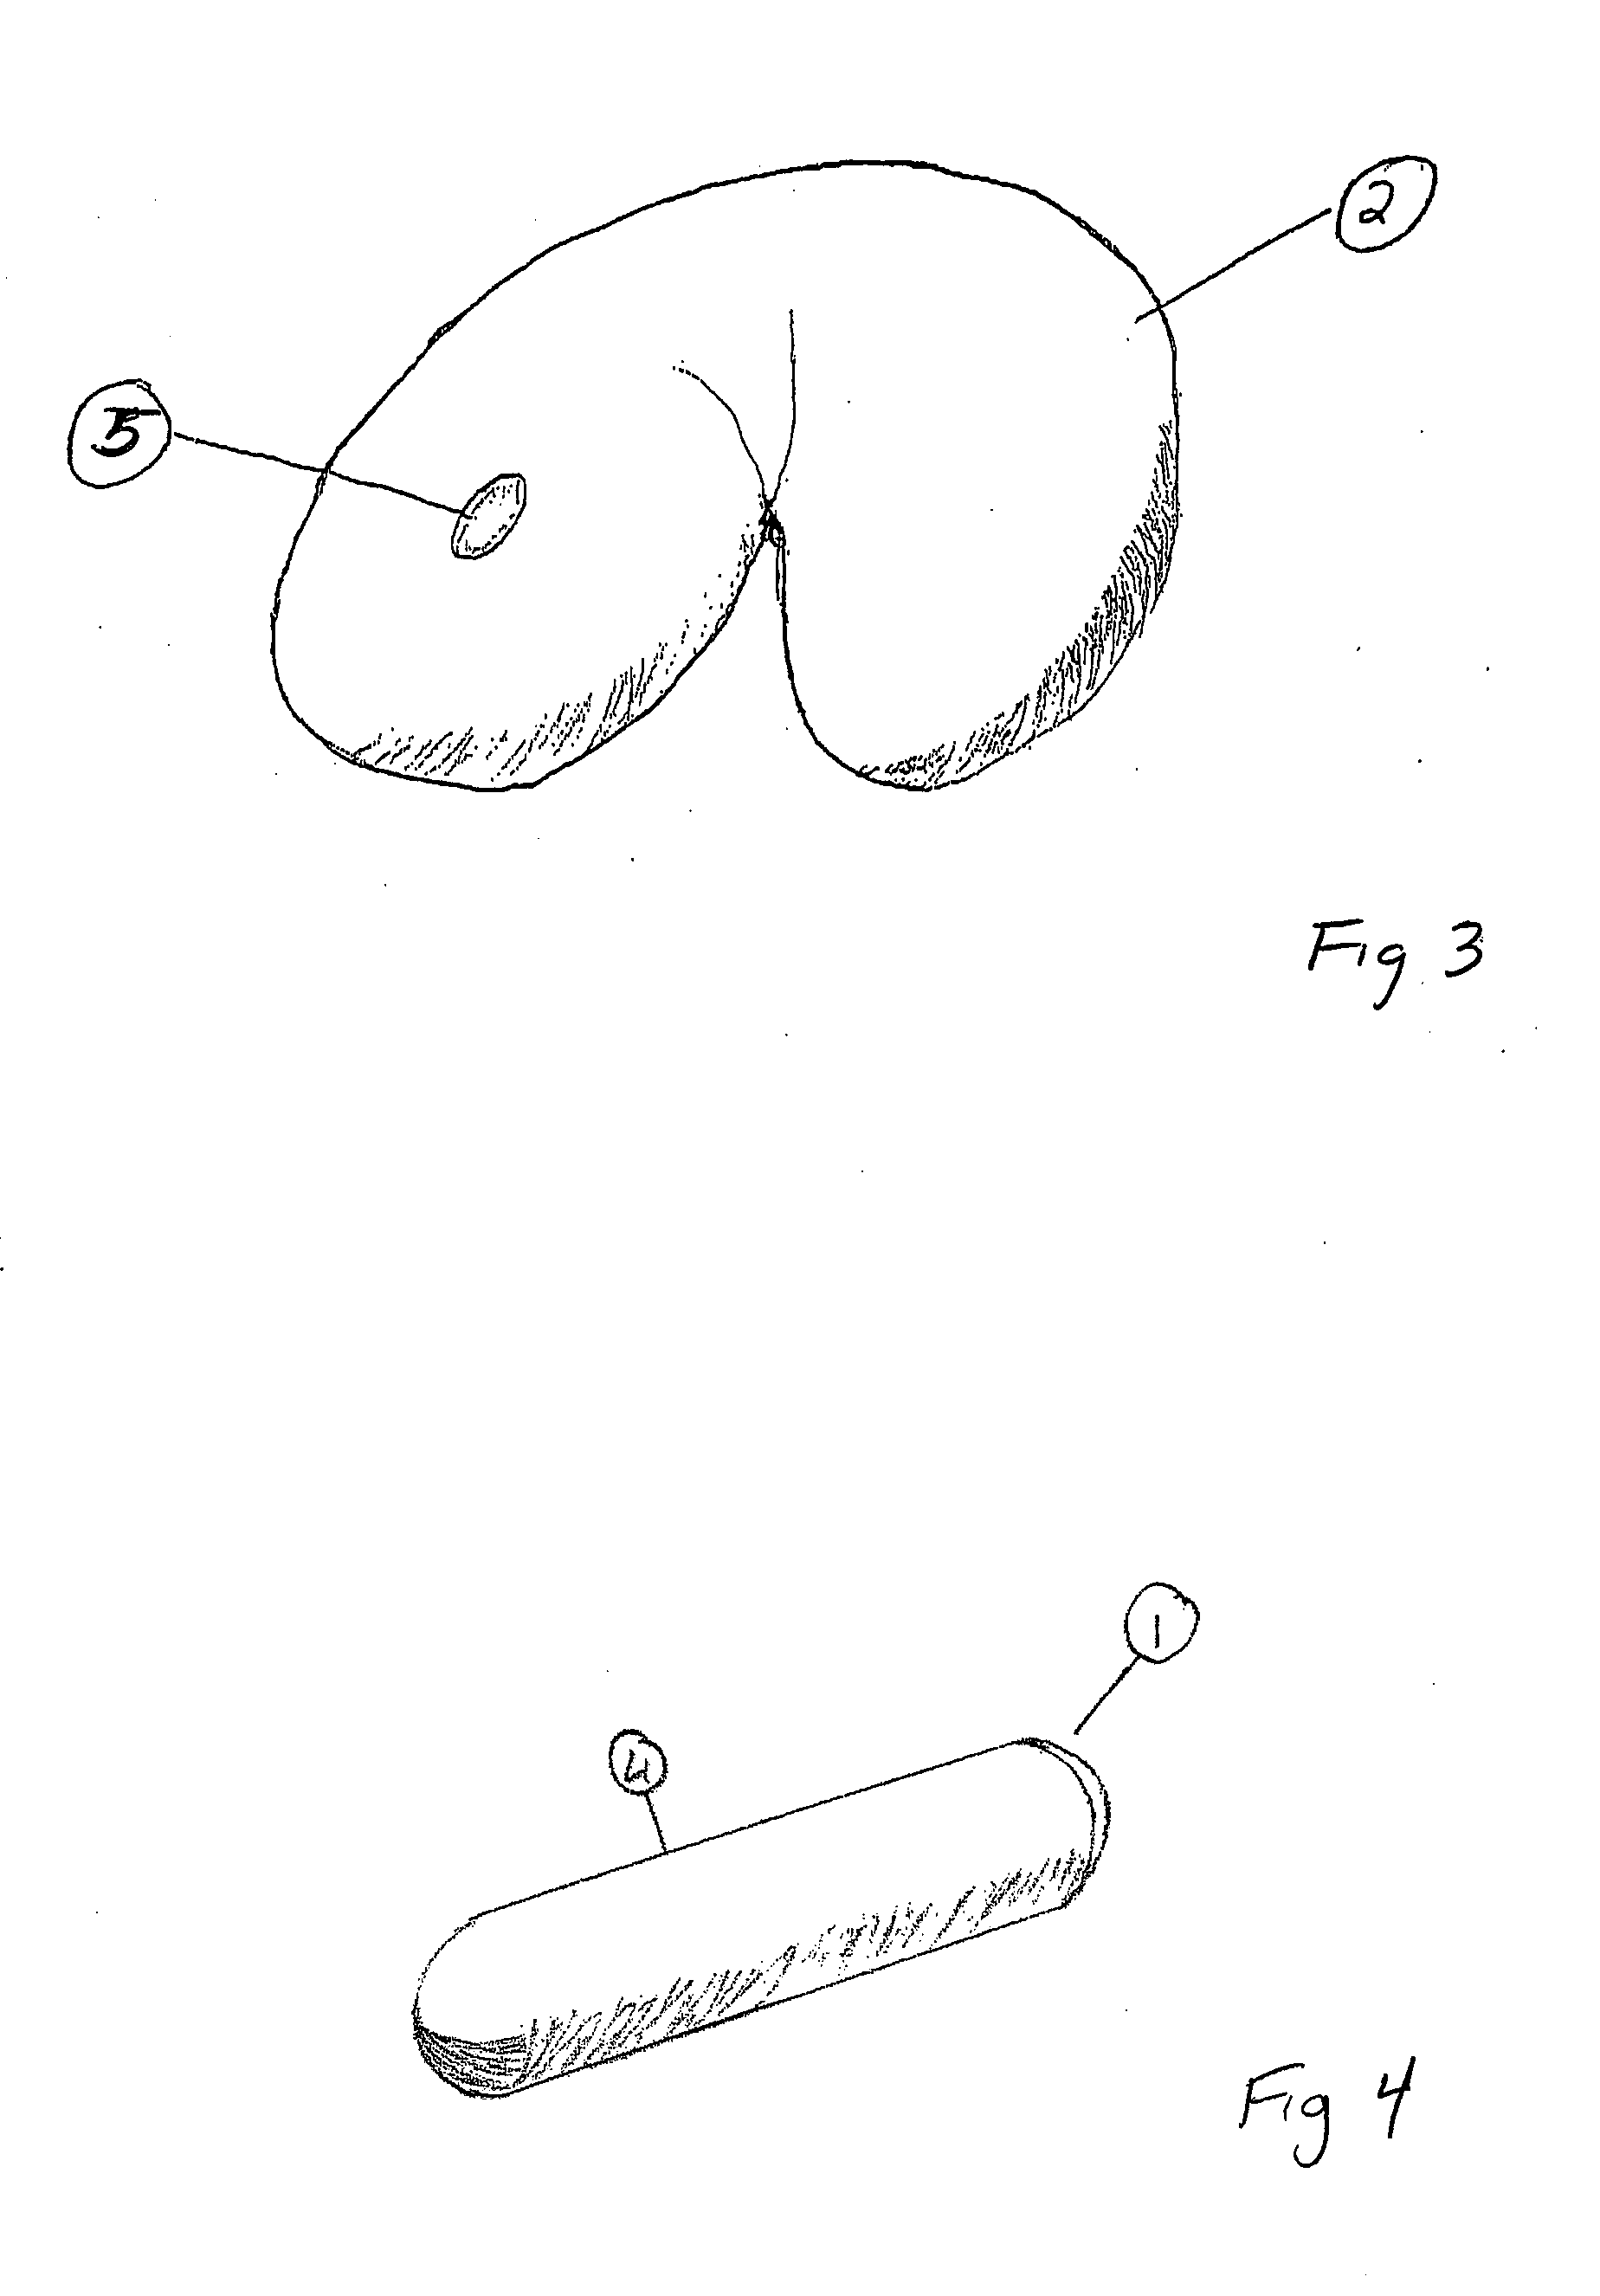 Intragastric Volume-Occupying Device